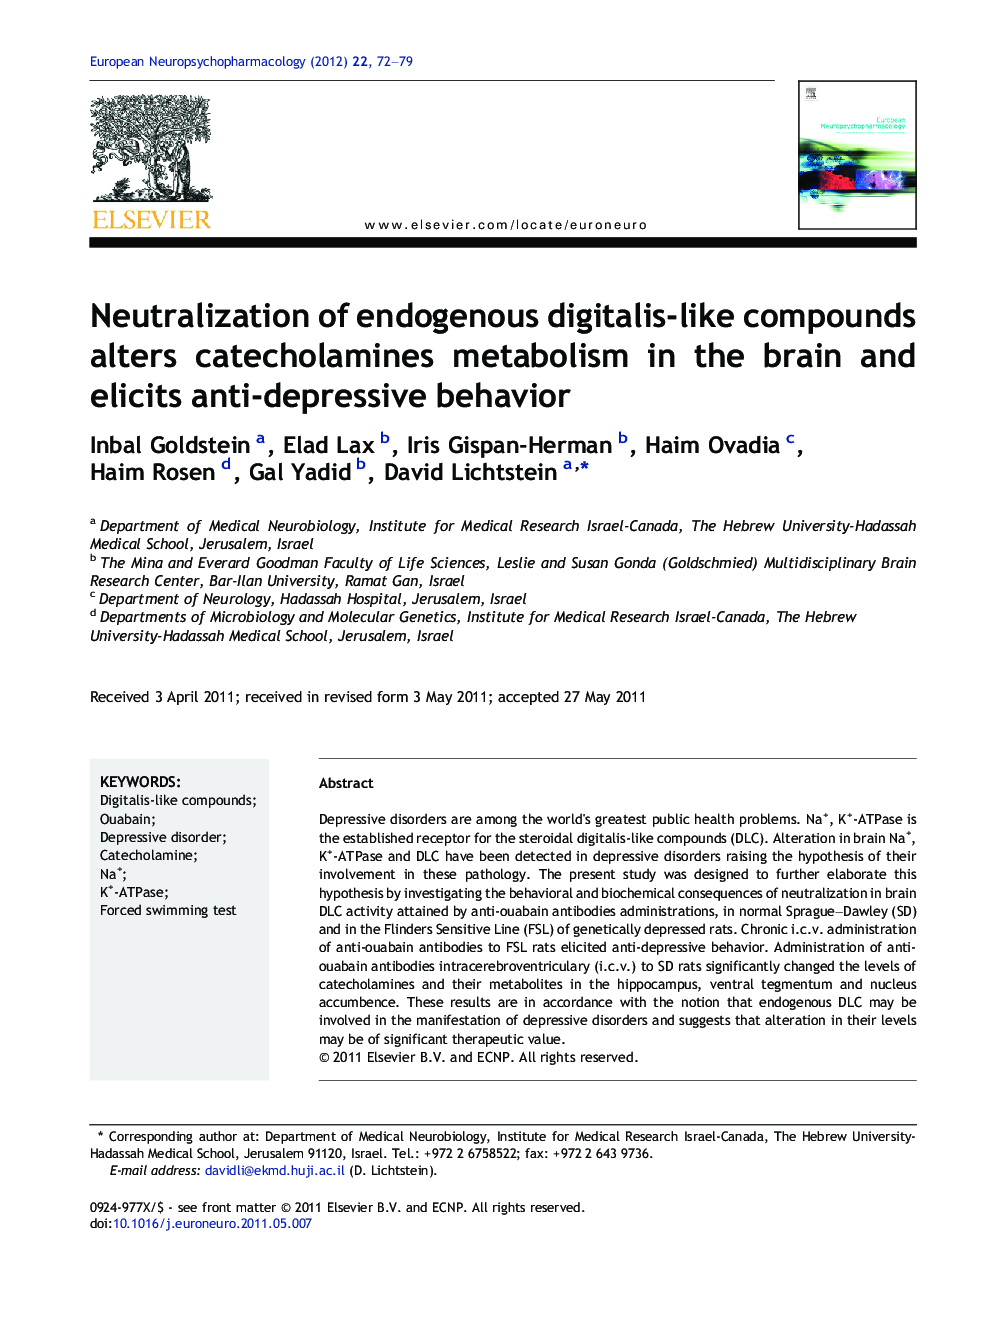 Neutralization of endogenous digitalis-like compounds alters catecholamines metabolism in the brain and elicits anti-depressive behavior